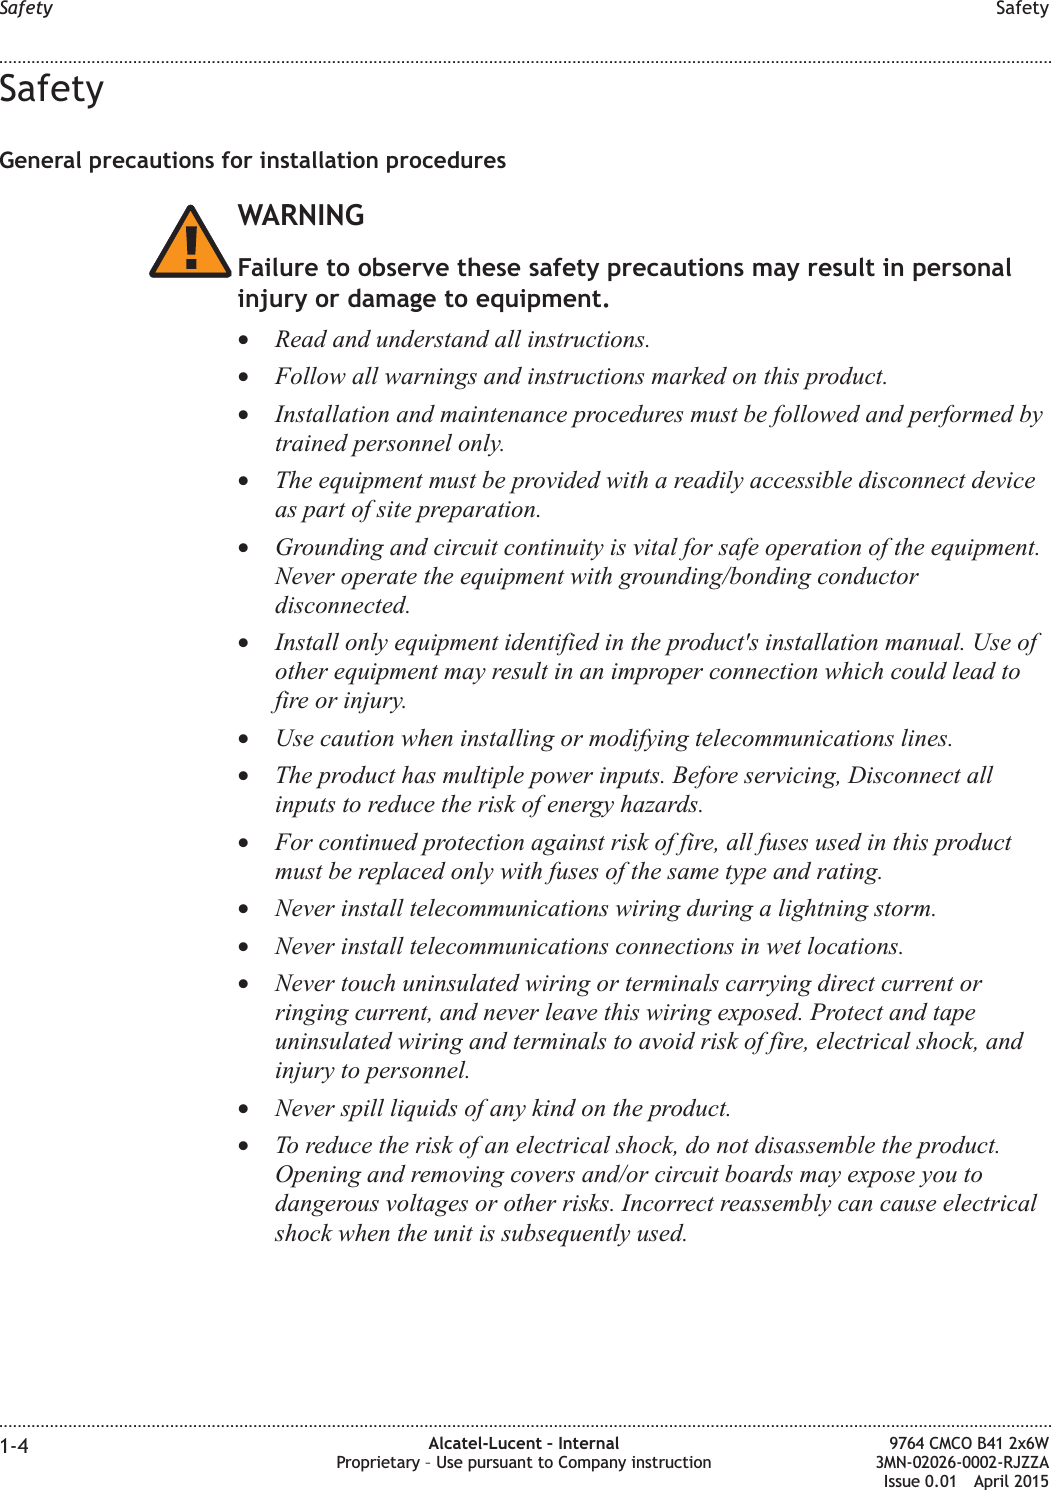 SafetyGeneral precautions for installation proceduresWARNINGFailure to observe these safety precautions may result in personalinjury or damage to equipment.•Read and understand all instructions.•Follow all warnings and instructions marked on this product.•Installation and maintenance procedures must be followed and performed bytrained personnel only.•The equipment must be provided with a readily accessible disconnect deviceas part of site preparation.•Grounding and circuit continuity is vital for safe operation of the equipment.Never operate the equipment with grounding/bonding conductordisconnected.•Install only equipment identified in the product&apos;s installation manual. Use ofother equipment may result in an improper connection which could lead tofire or injury.•Use caution when installing or modifying telecommunications lines.•The product has multiple power inputs. Before servicing, Disconnect allinputs to reduce the risk of energy hazards.•For continued protection against risk of fire, all fuses used in this productmust be replaced only with fuses of the same type and rating.•Never install telecommunications wiring during a lightning storm.•Never install telecommunications connections in wet locations.•Never touch uninsulated wiring or terminals carrying direct current orringing current, and never leave this wiring exposed. Protect and tapeuninsulated wiring and terminals to avoid risk of fire, electrical shock, andinjury to personnel.•Never spill liquids of any kind on the product.•To reduce the risk of an electrical shock, do not disassemble the product.Opening and removing covers and/or circuit boards may expose you todangerous voltages or other risks. Incorrect reassembly can cause electricalshock when the unit is subsequently used.Safety Safety........................................................................................................................................................................................................................................................................................................................................................................................................................................................................1-4 Alcatel-Lucent – InternalProprietary – Use pursuant to Company instruction9764 CMCO B41 2x6W3MN-02026-0002-RJZZAIssue 0.01 April 2015PRELIMINARYPRELIMINARY